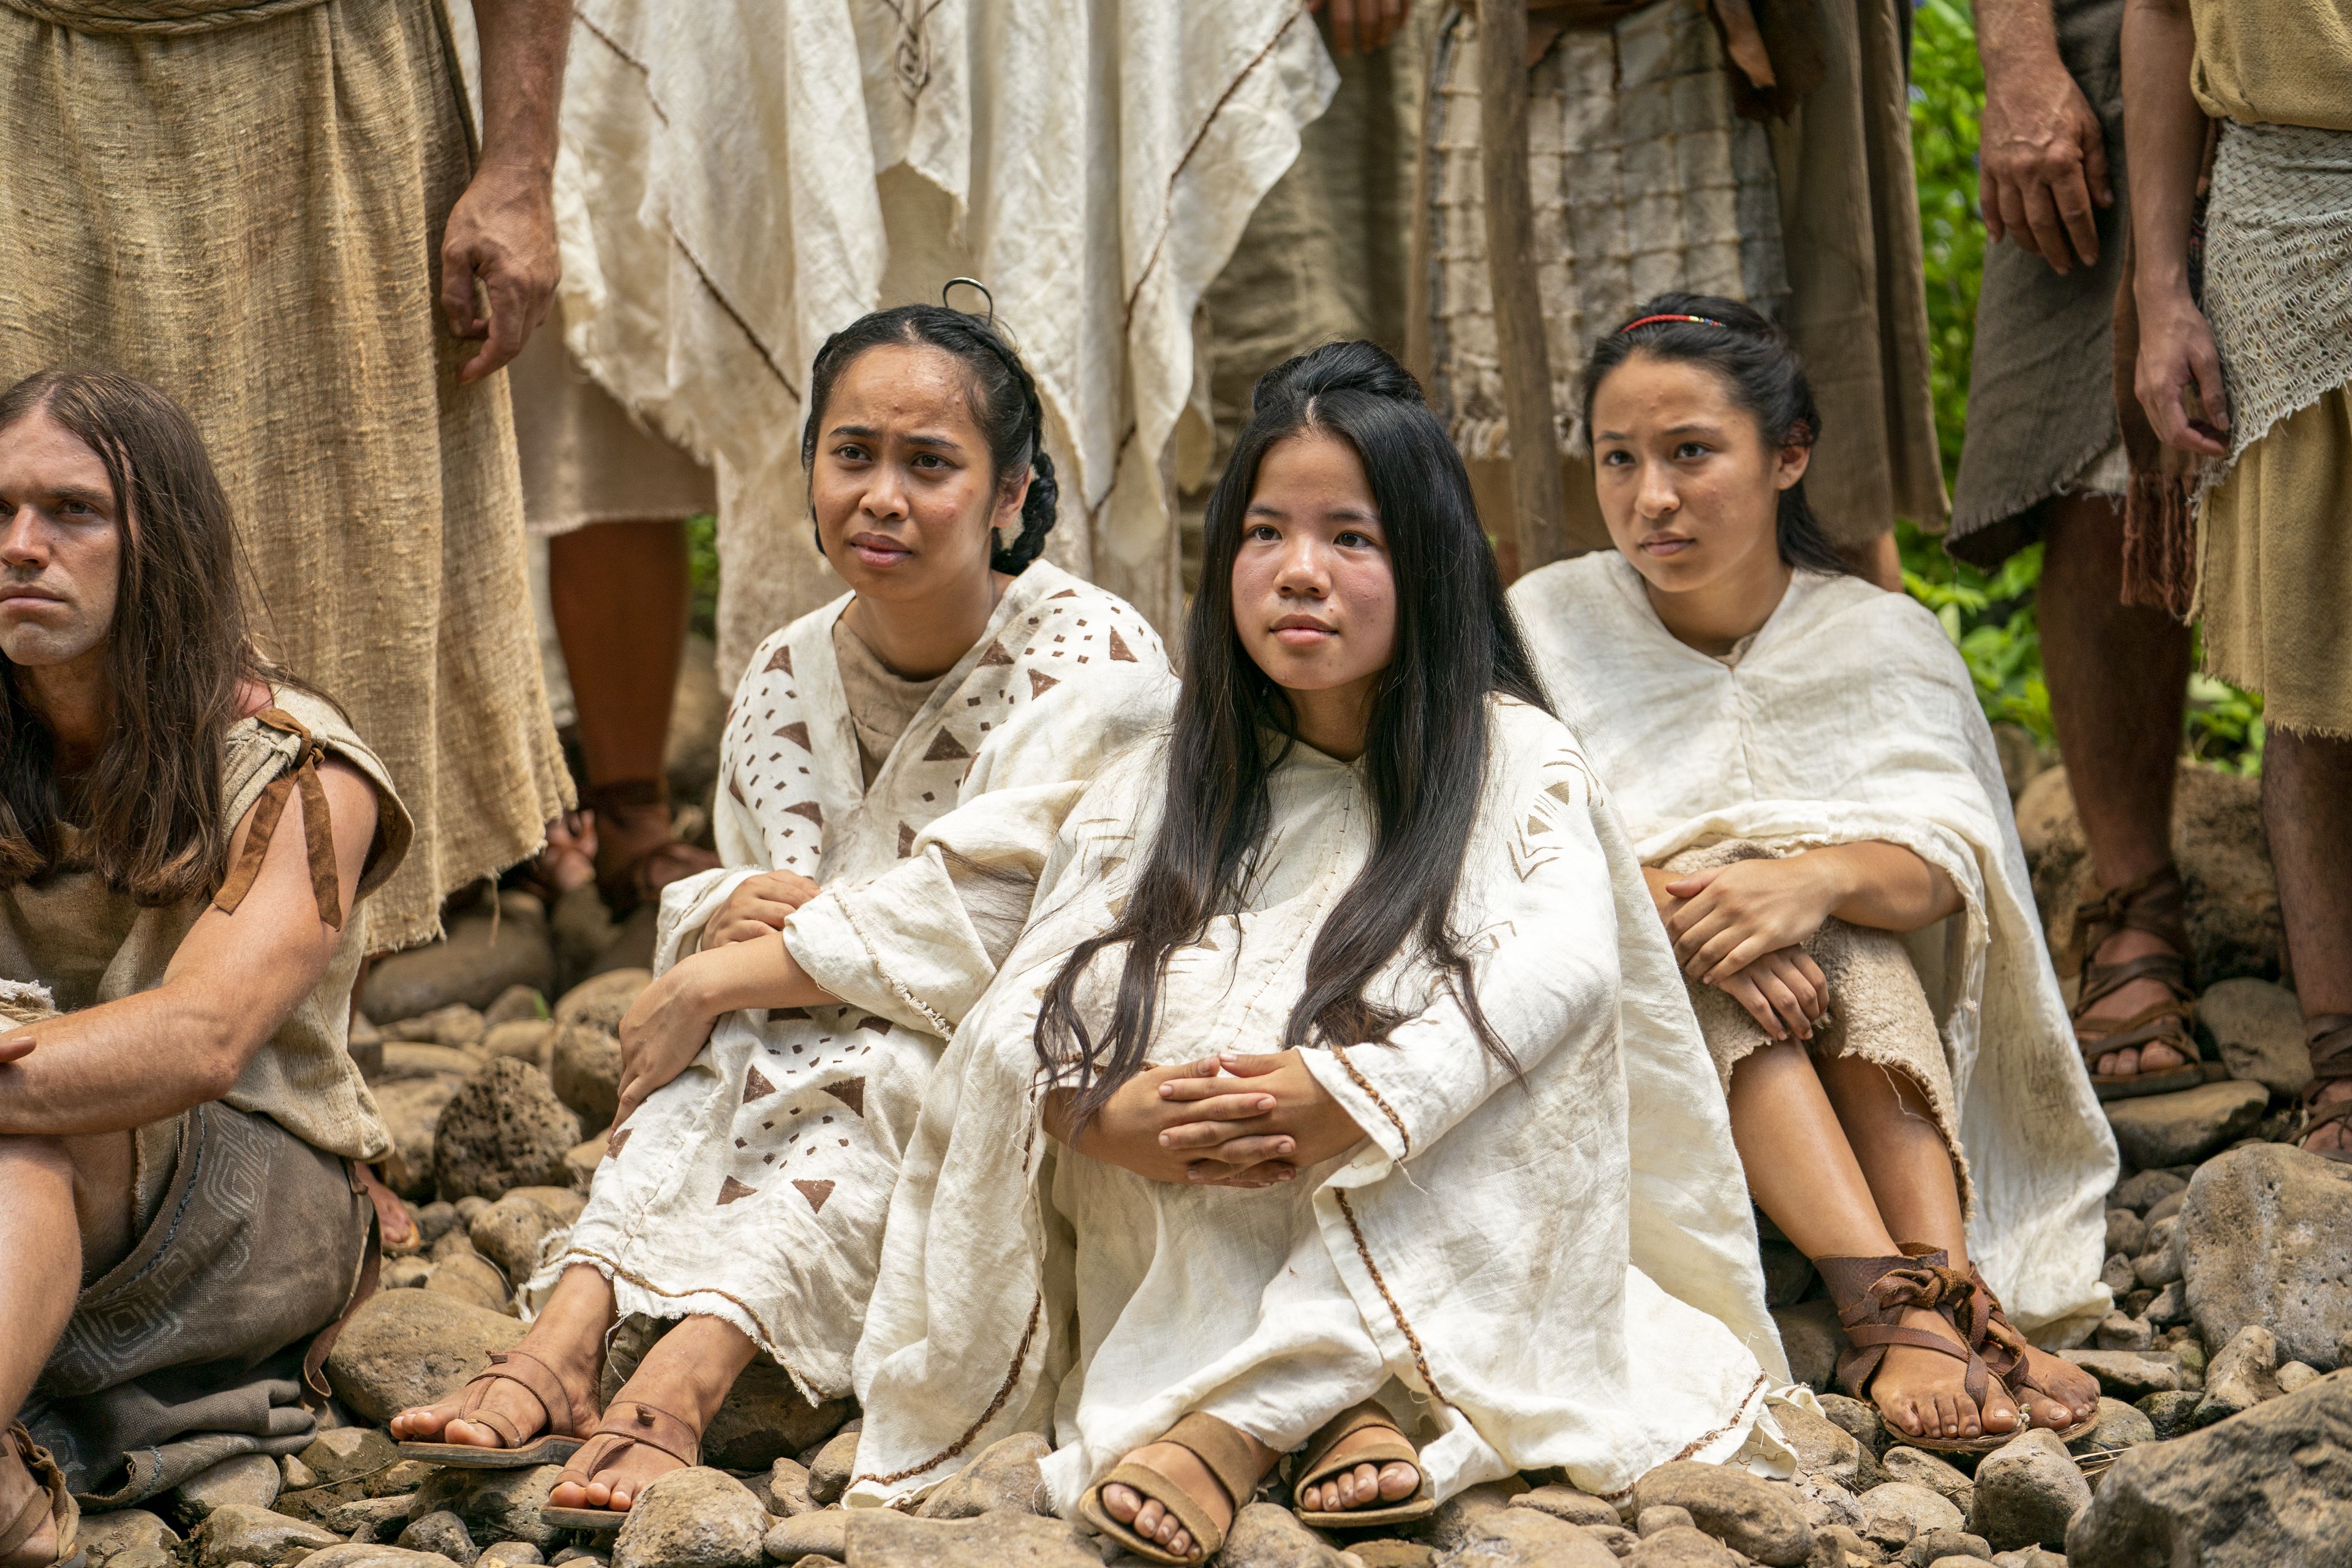 People prepare themselves to be baptized at the Waters of Mormon. They listen to Alma teach and testify.